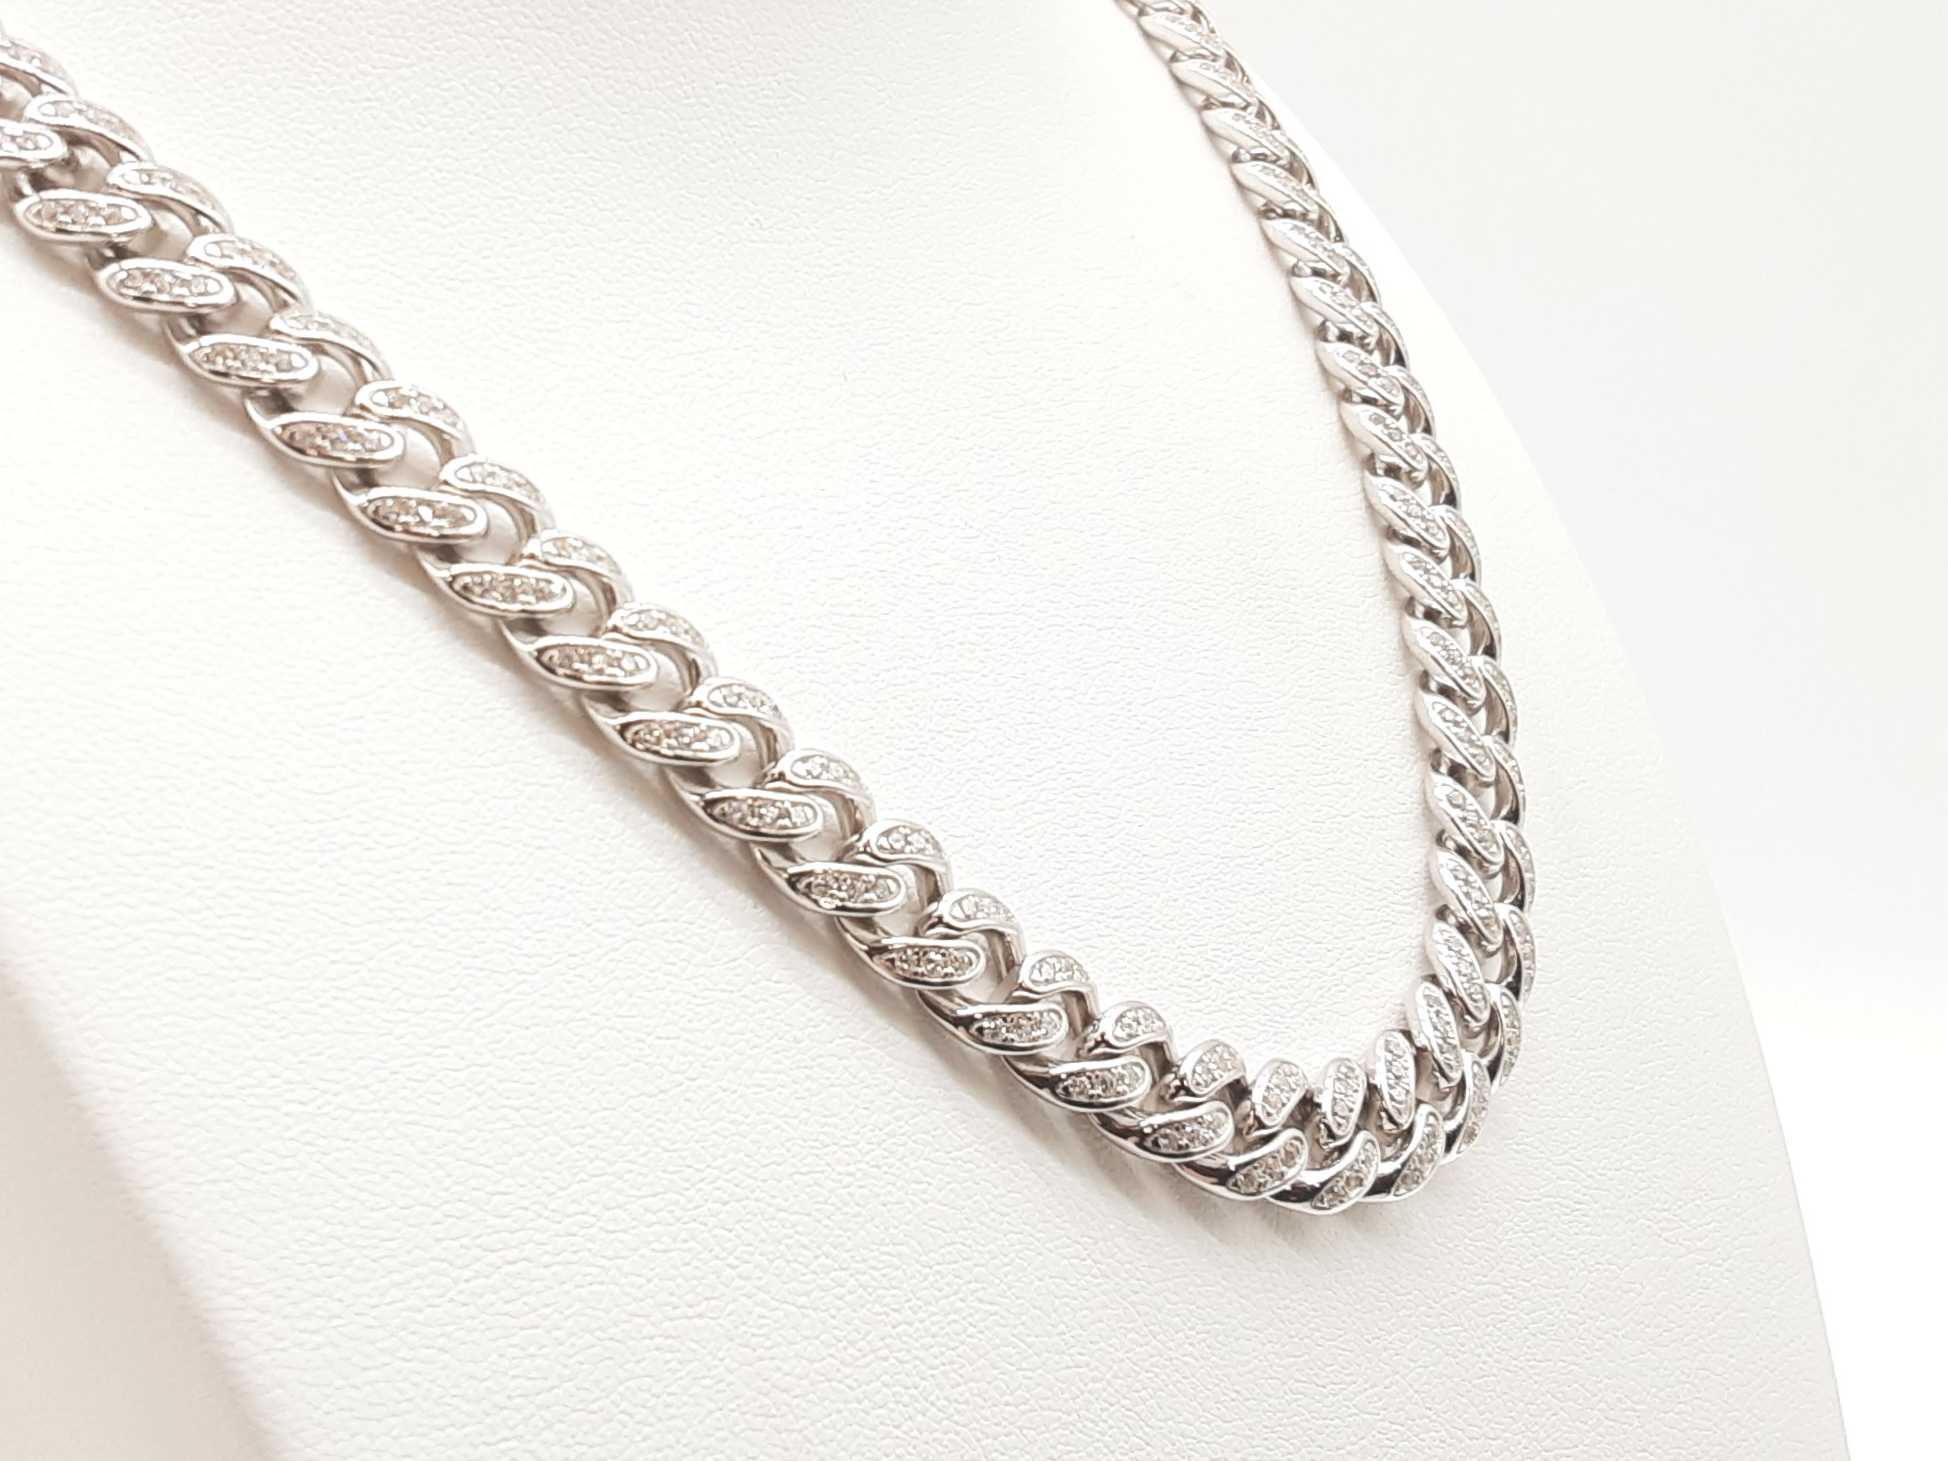 Sterling Silver Cz Cuban Link Chain 70.7 Grams 22 Inch Lhlcrde 144020014486